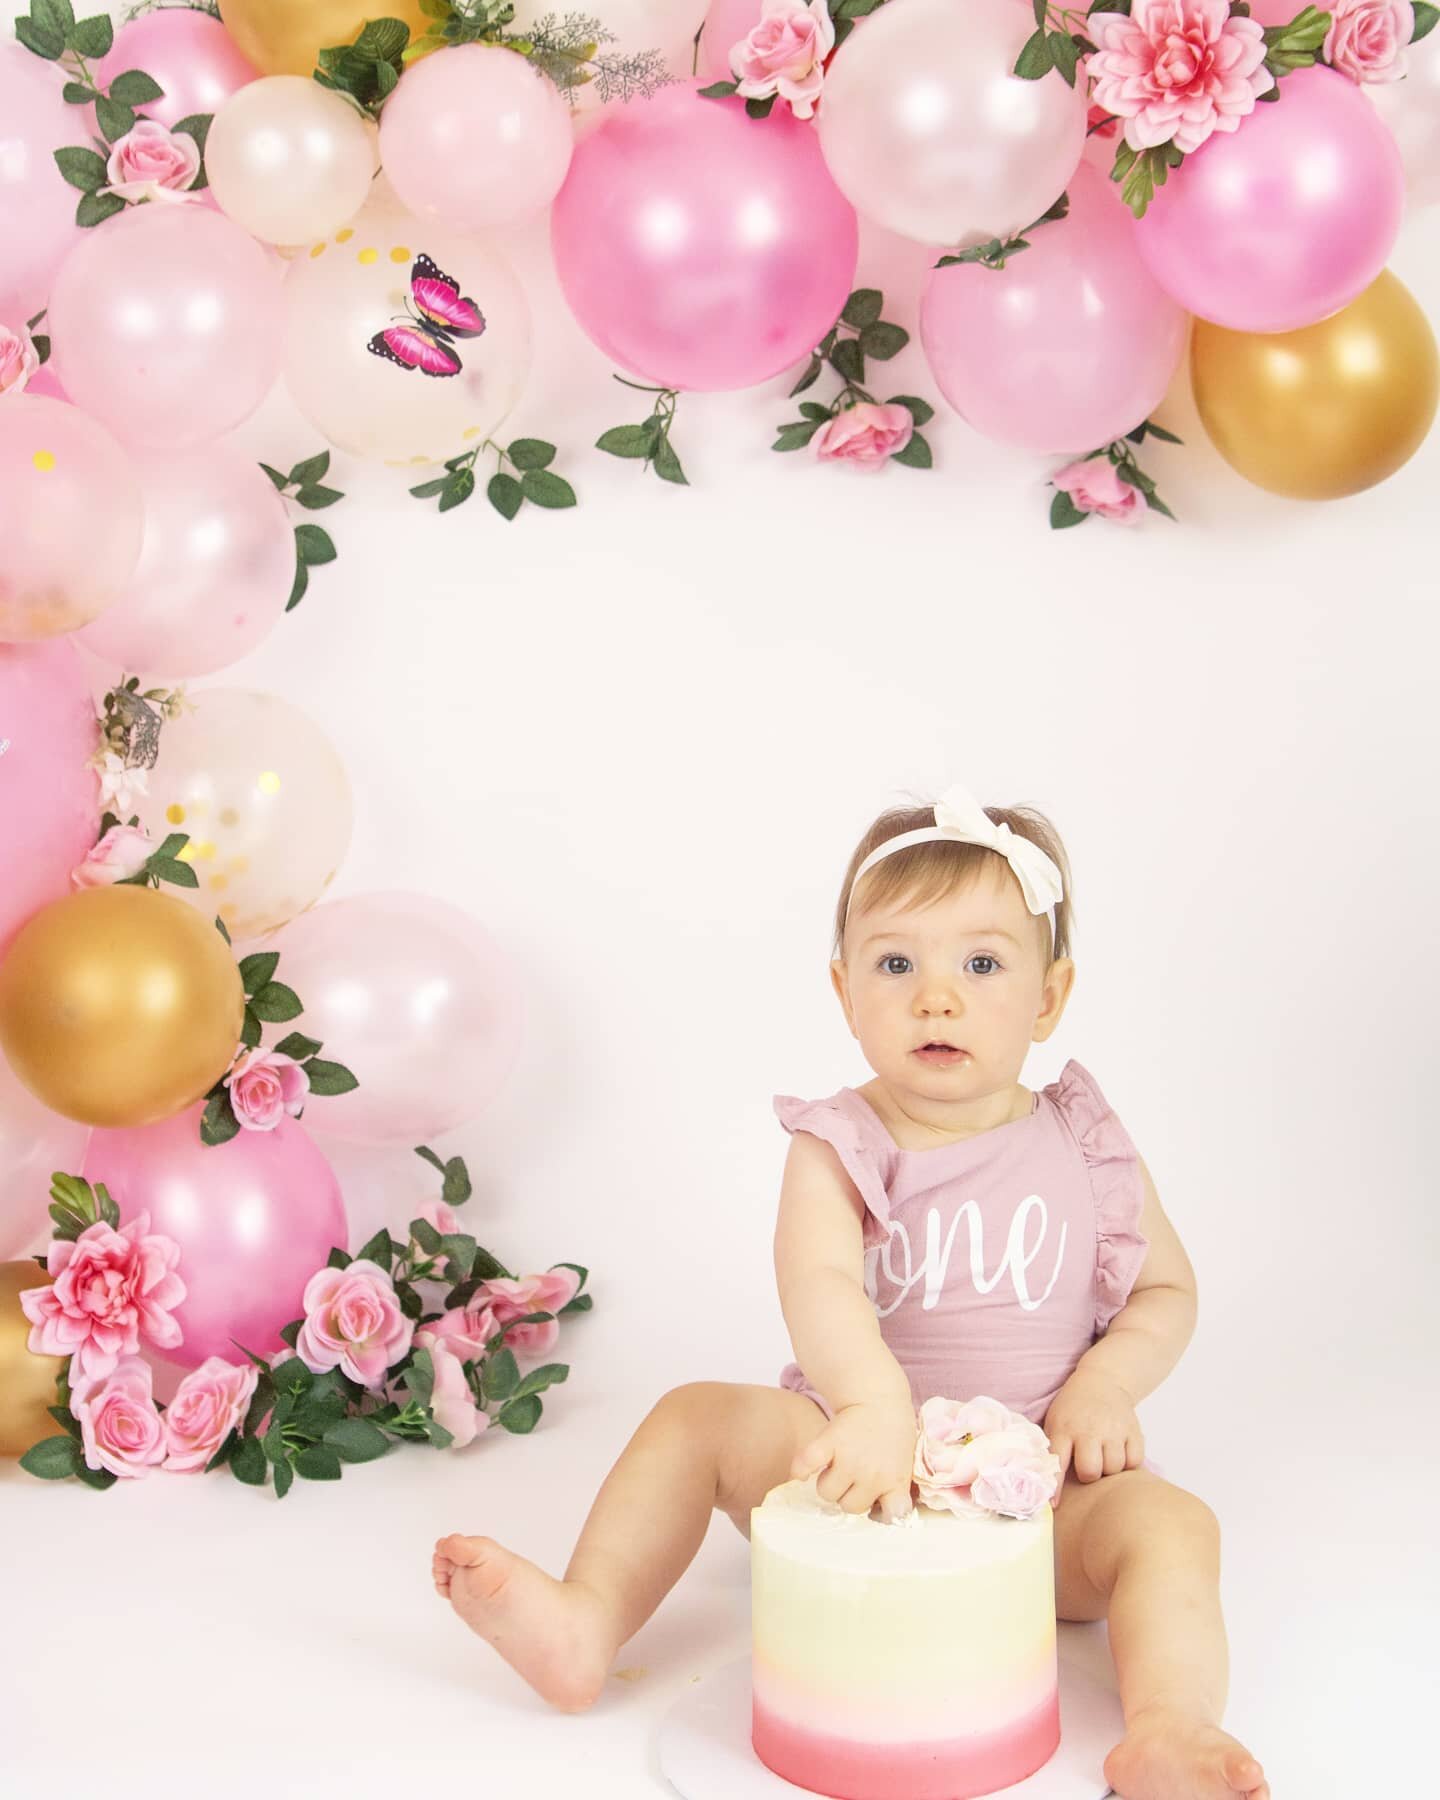 I got to see this sweet girl again for her cakesmash! I swear it doesn't seem like it's been a year since her newborn photos. 

Cakes : @julyco.ca
.
.
.
.
.
.
.
.#magicofchildhood #simplychildren #letthembelittle #camera_mama #momtog #letthekids #cak